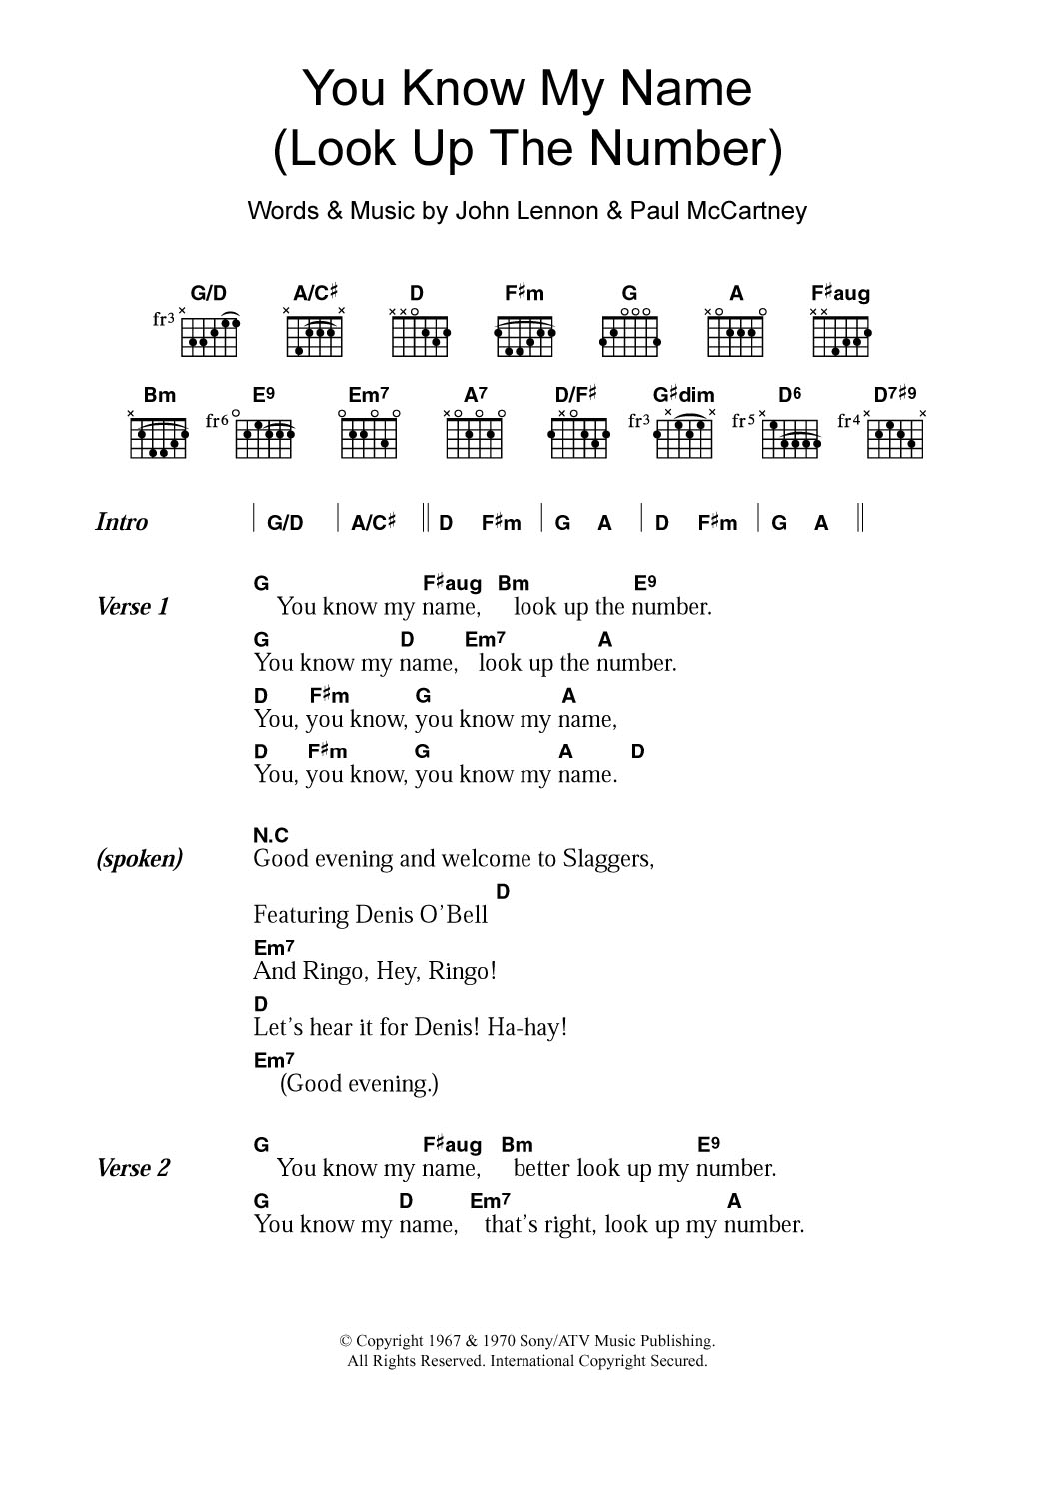 Download The Beatles You Know My Name (Look Up The Number) Sheet Music